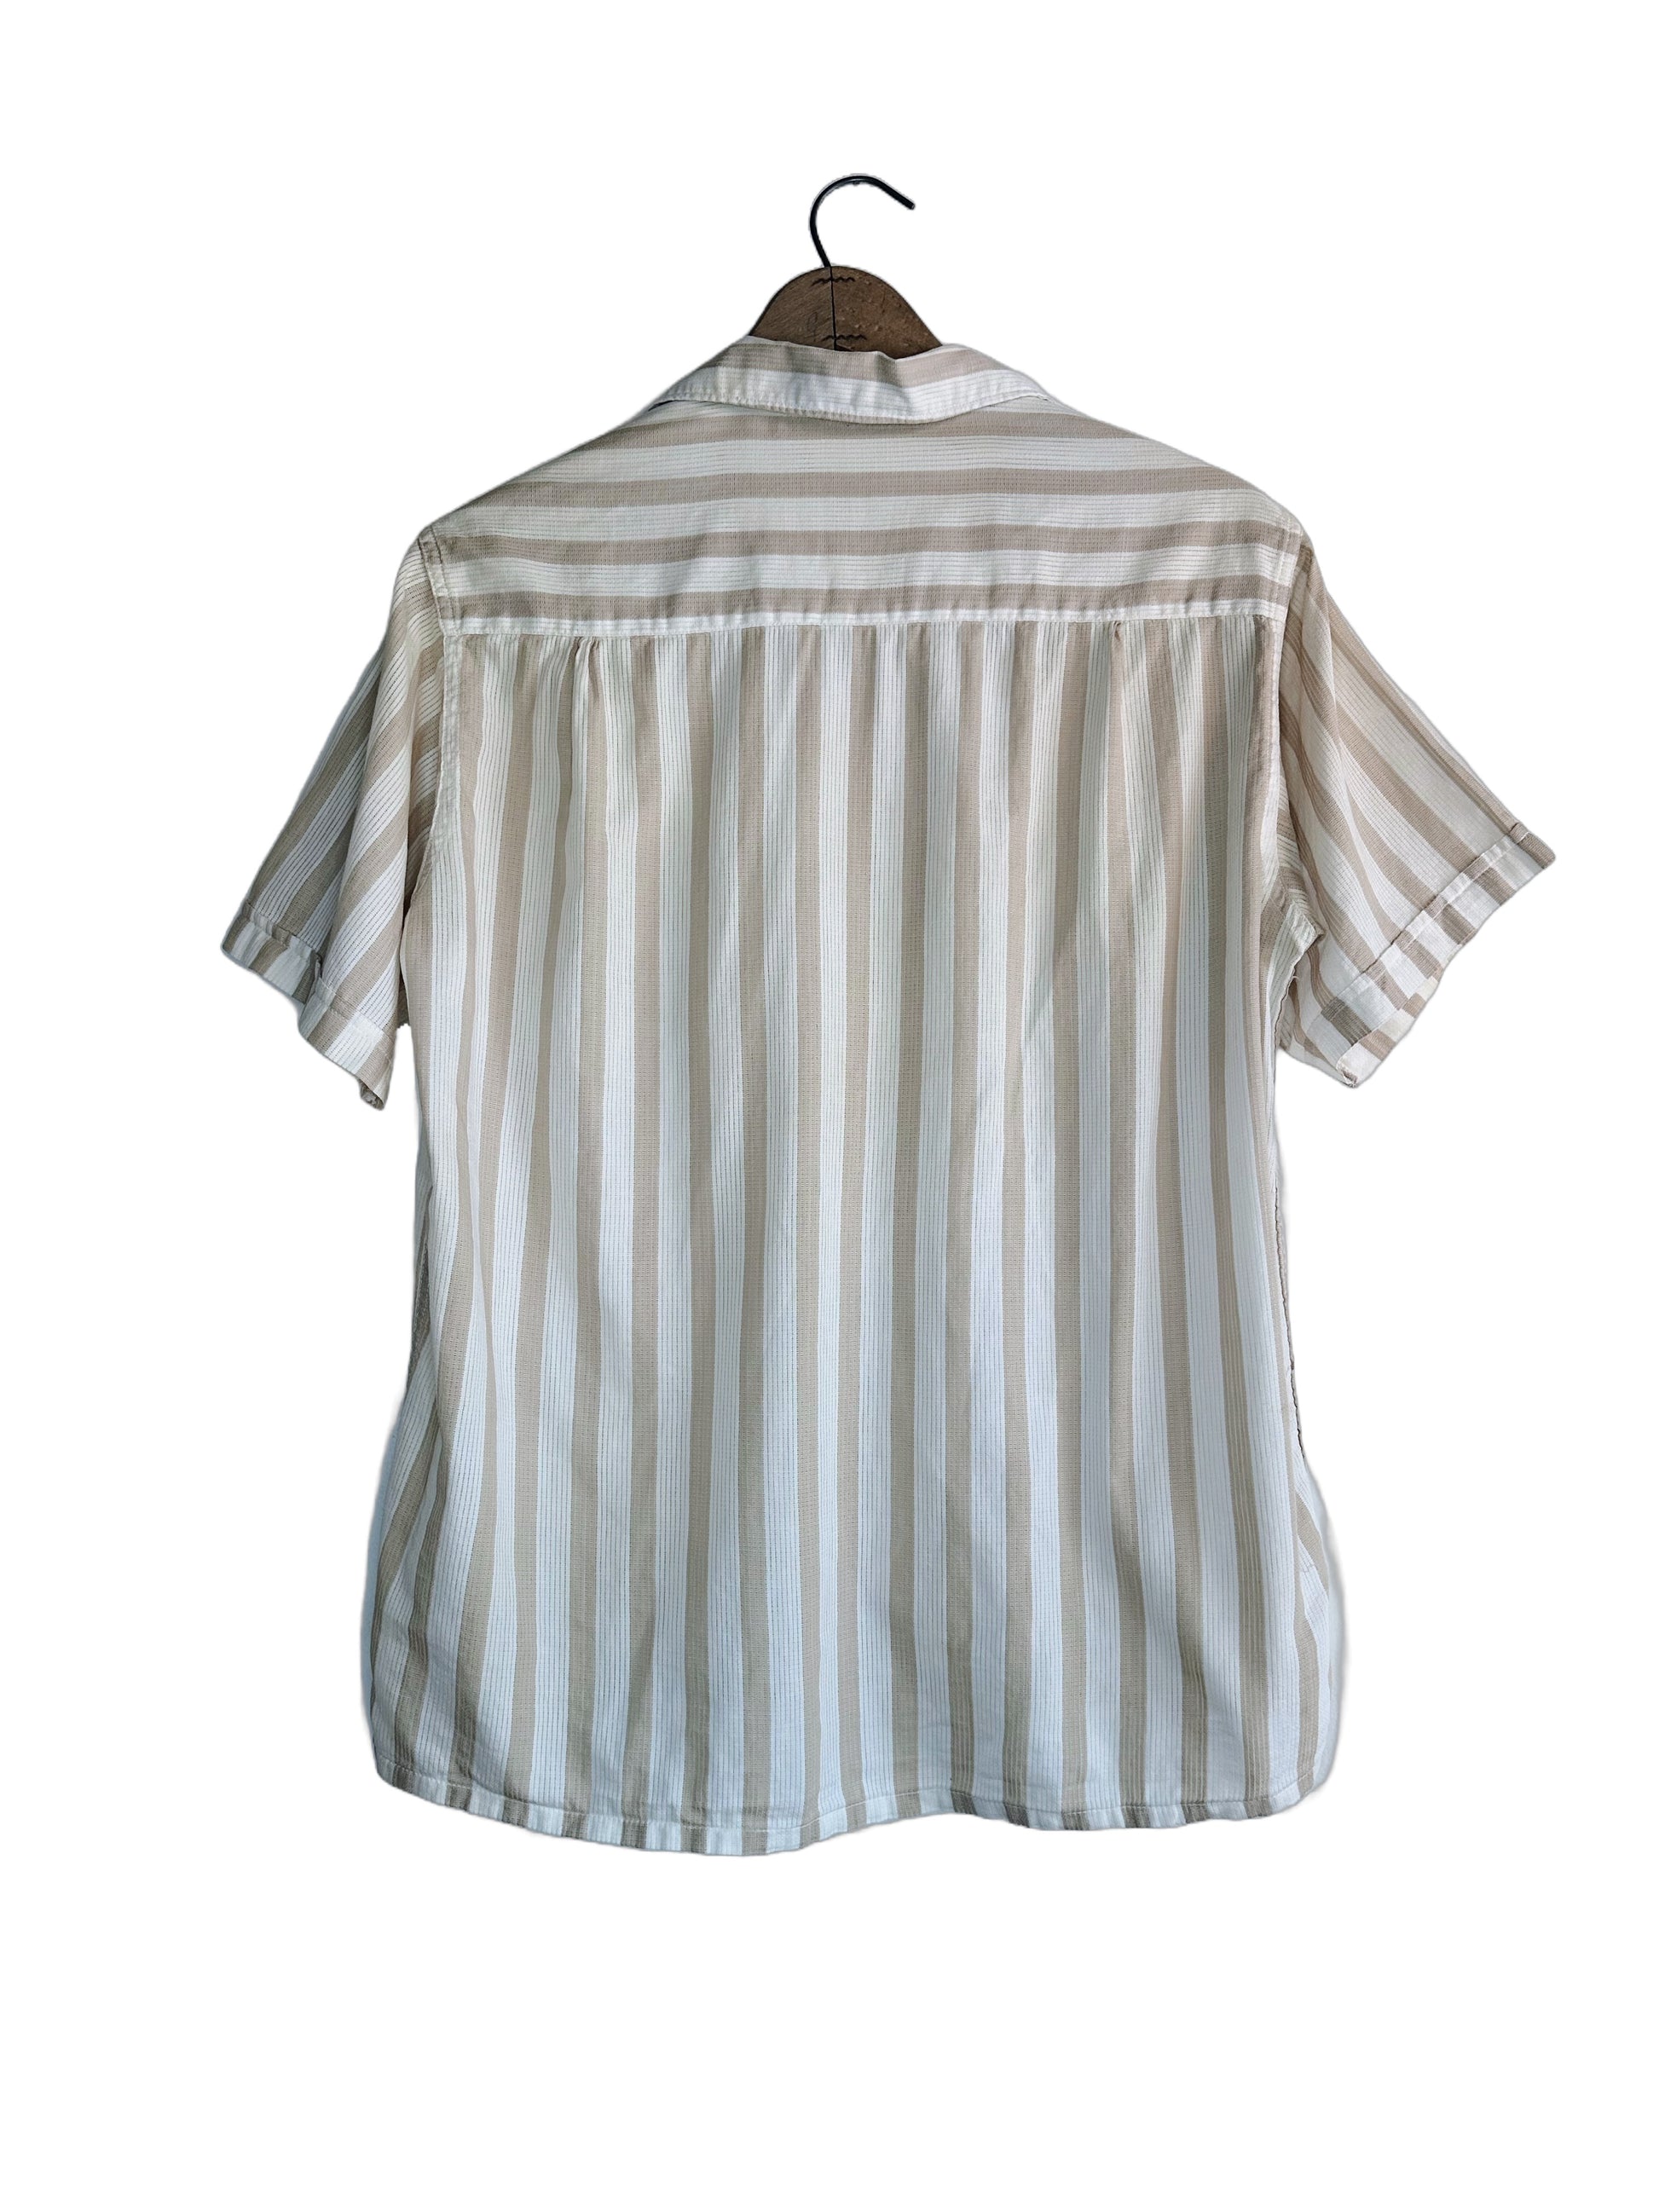 back view of shirt. Vertical stripes on shoulders, horizontal stripes on body 